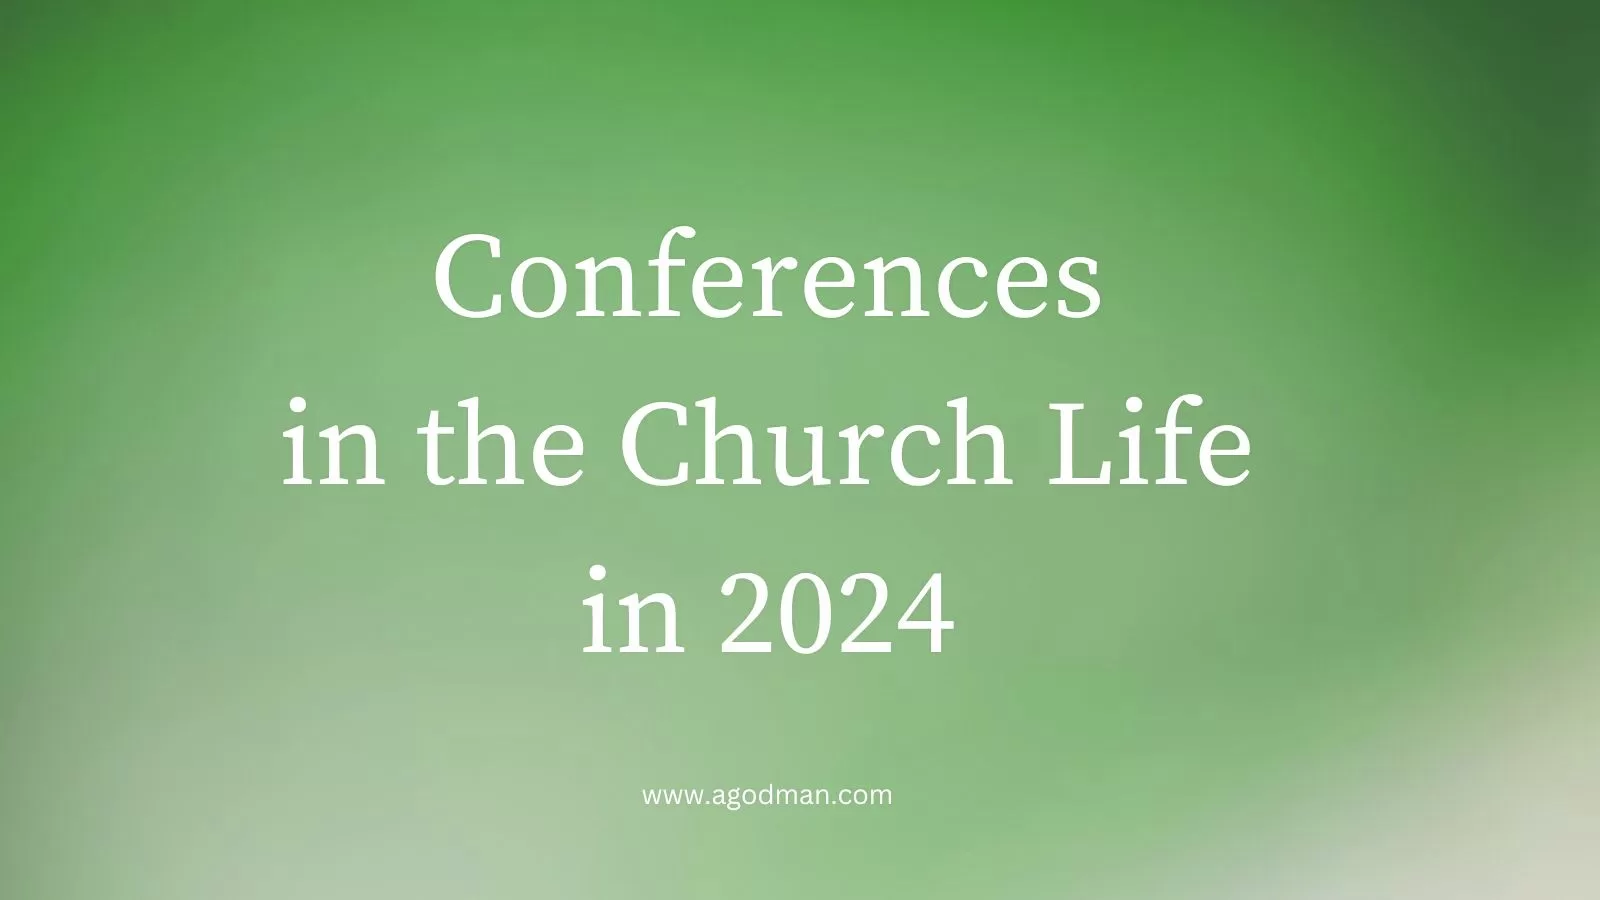 Conferences in the Church Life in 2024 via